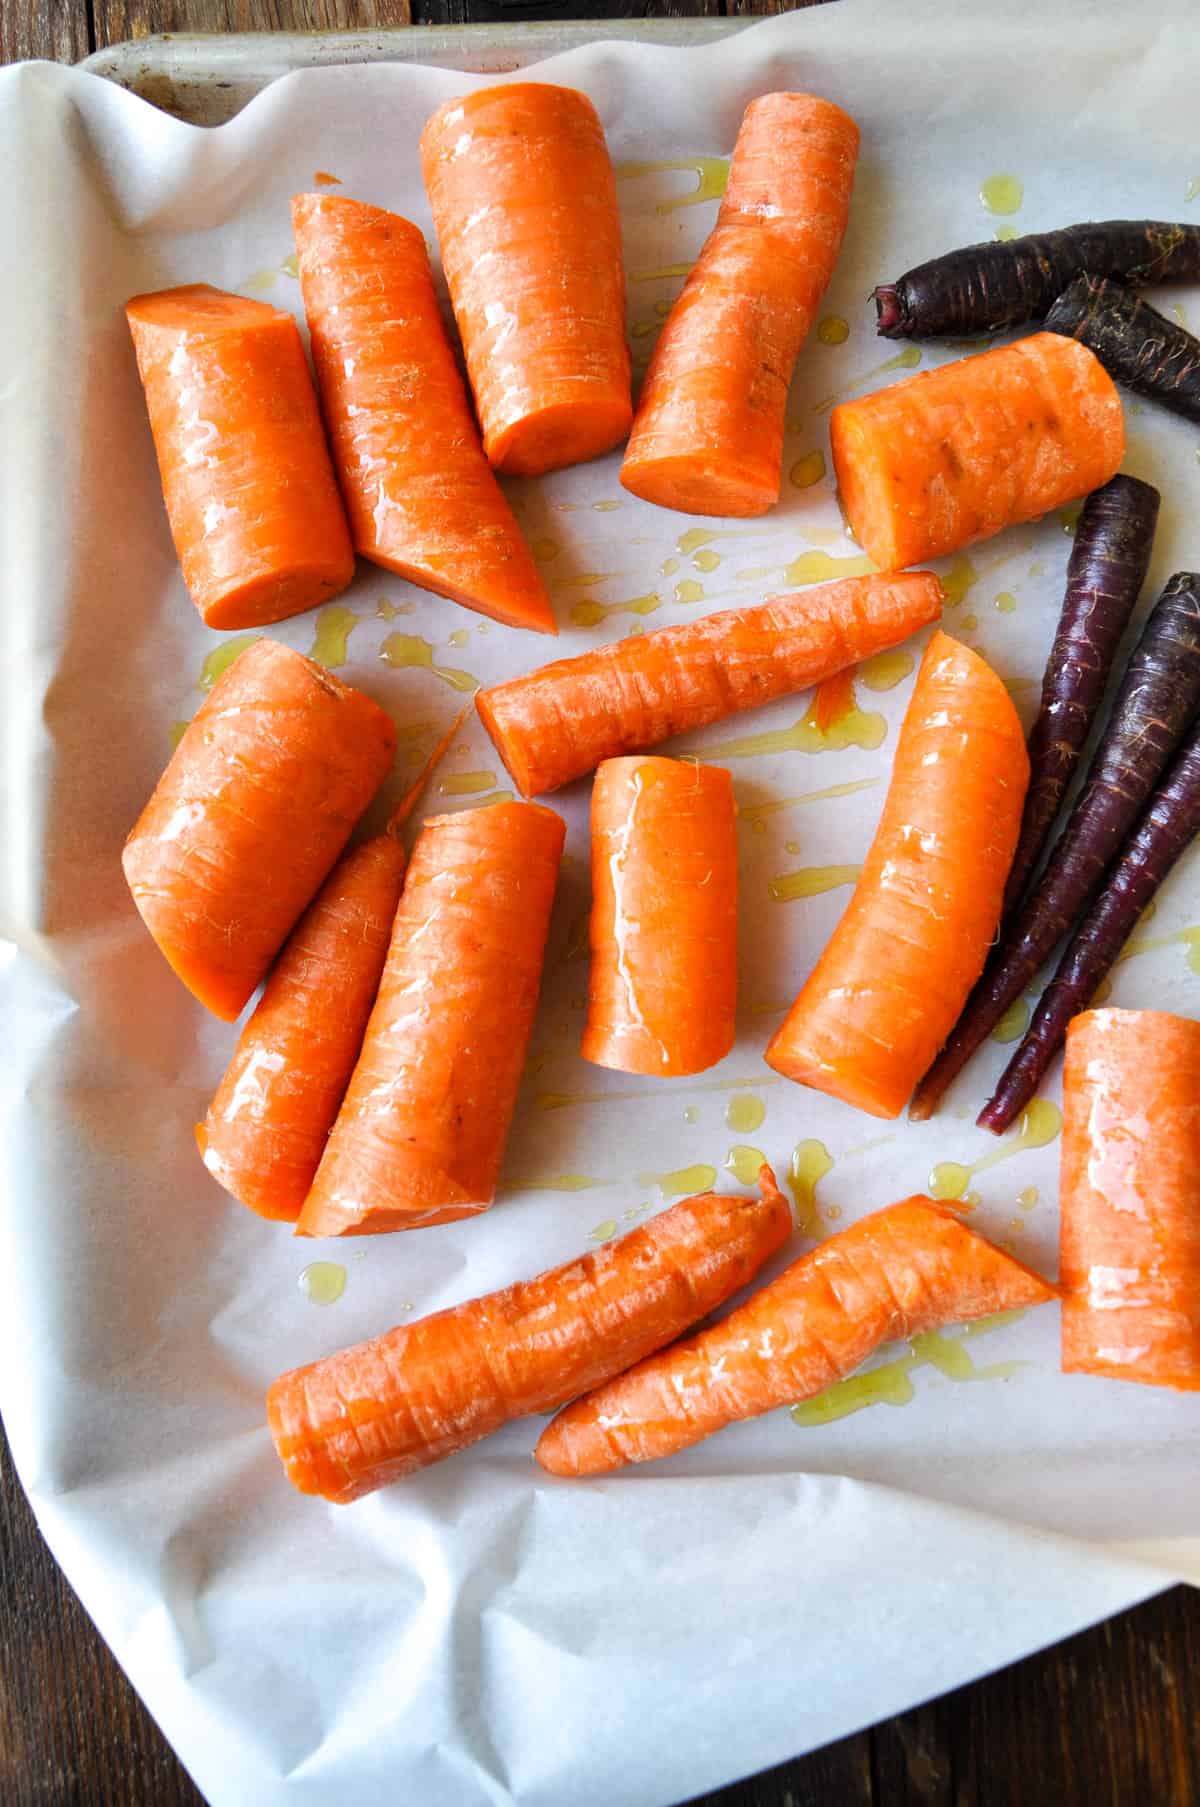 Halved carrots with olive oil drizzled over